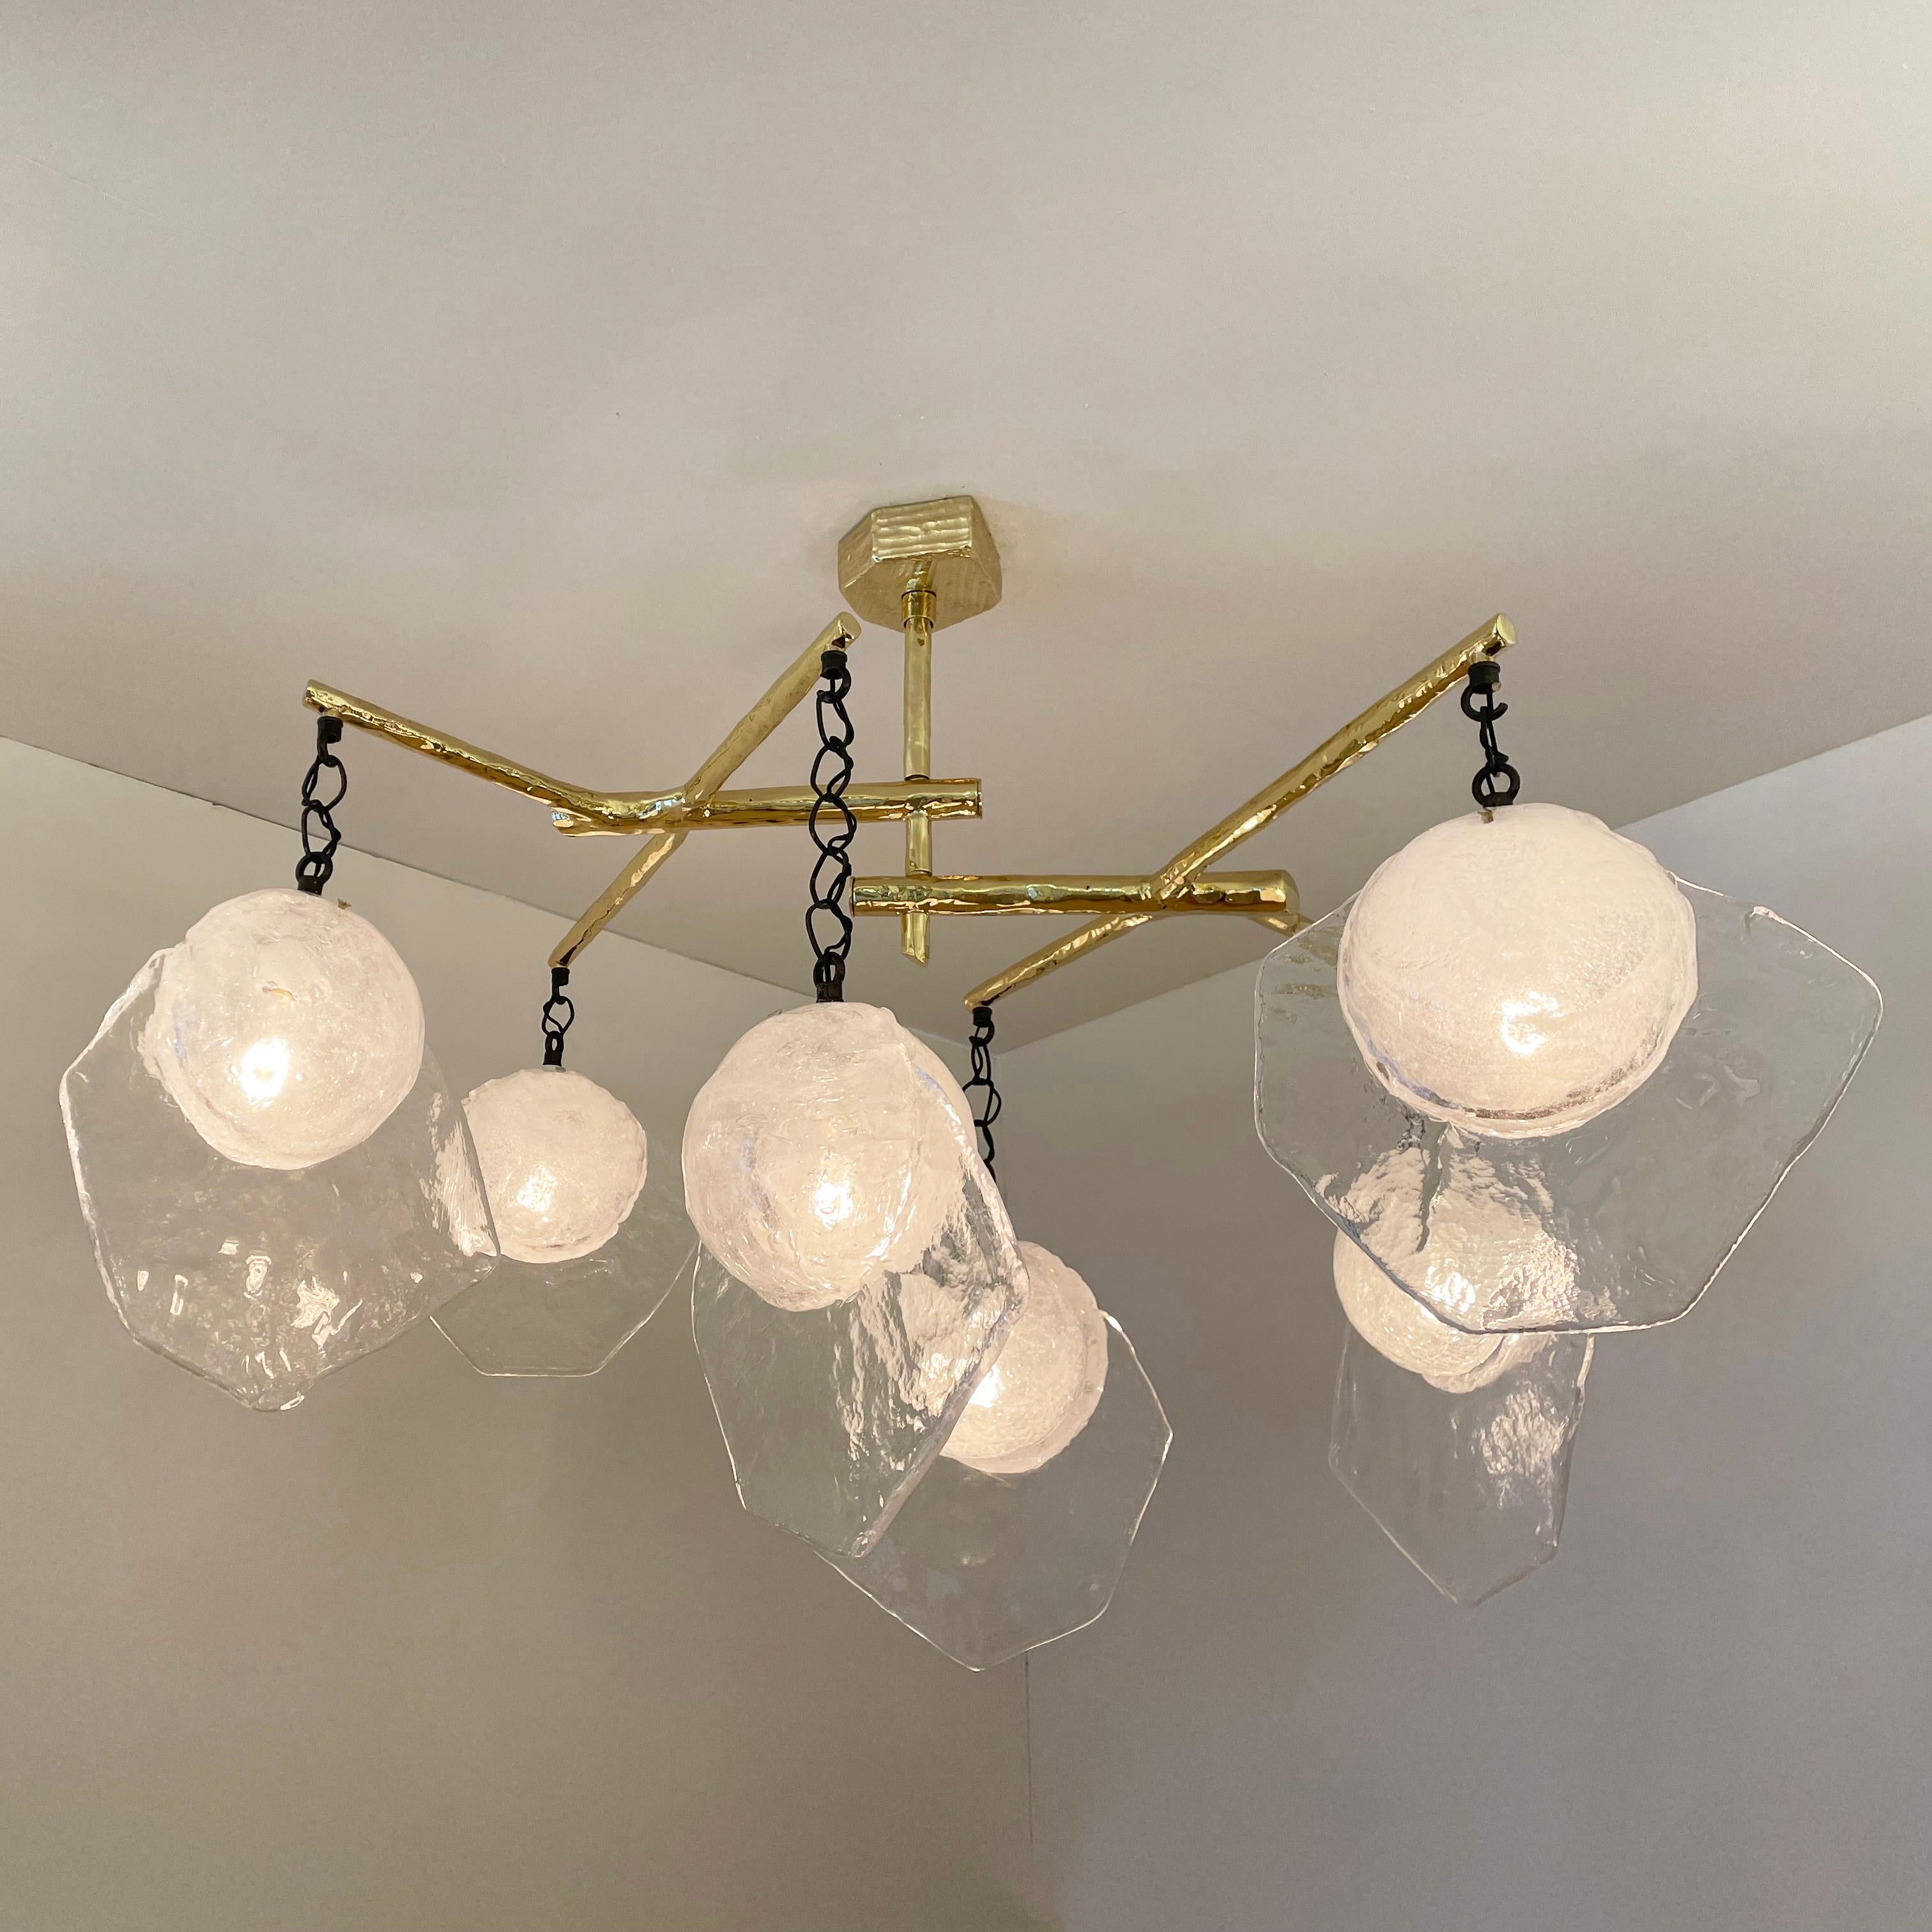 The Levante ceiling light is composed of six Murano glass elements hanging from an organic cast brass frame. Each hand blown glass has a bubble infused core and a textured fin. Shown with a polished brass frame and Brunito Nero